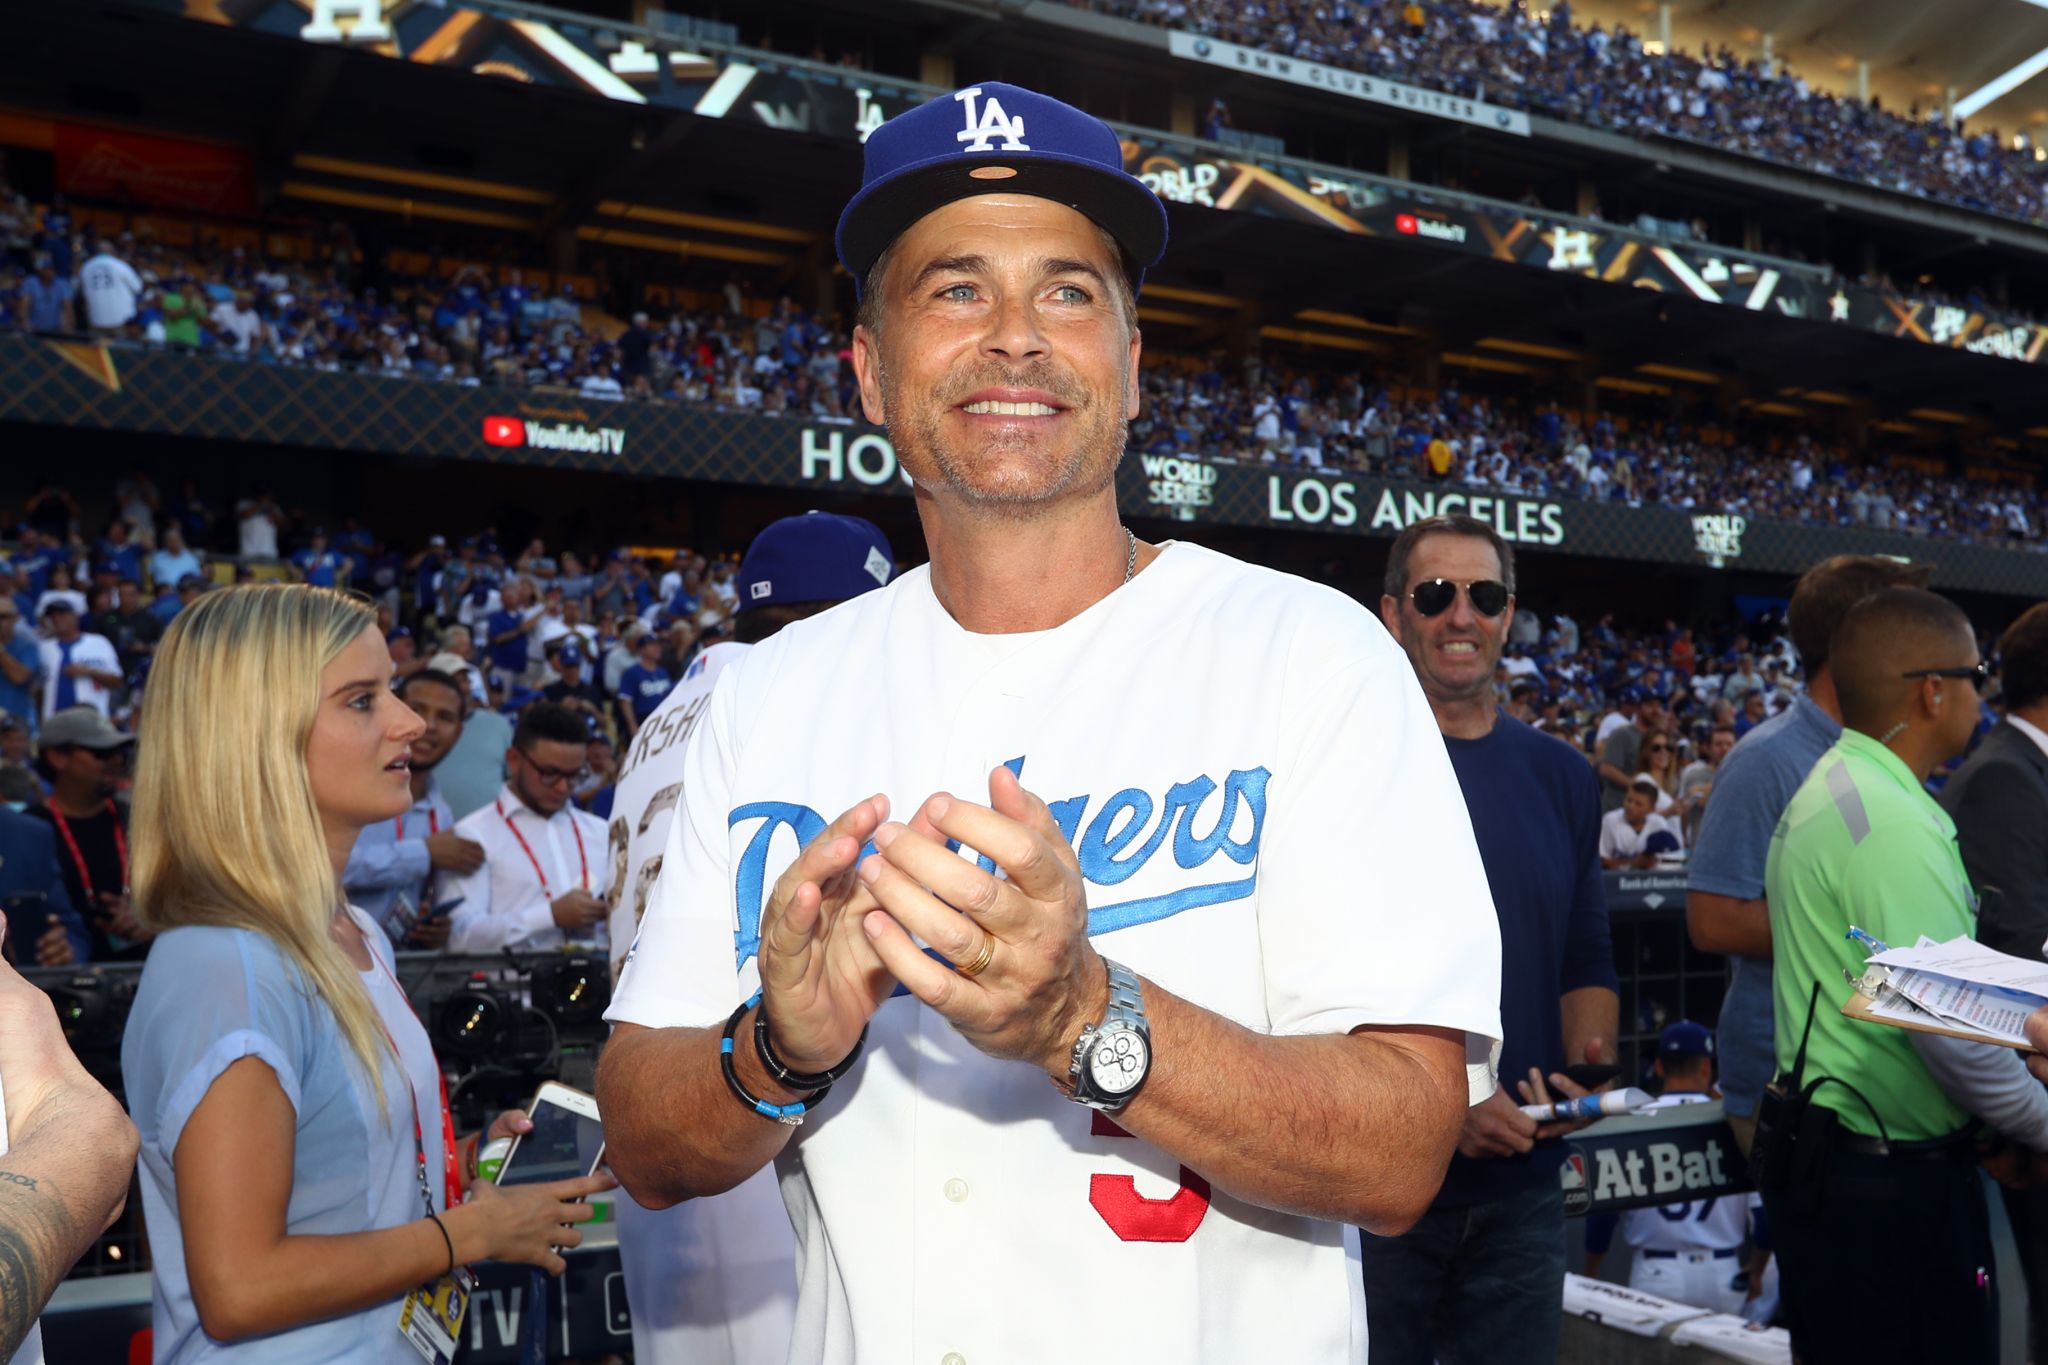 Rob Lowe on his Infamous NFL Hat & His Take on the Houston Astros 